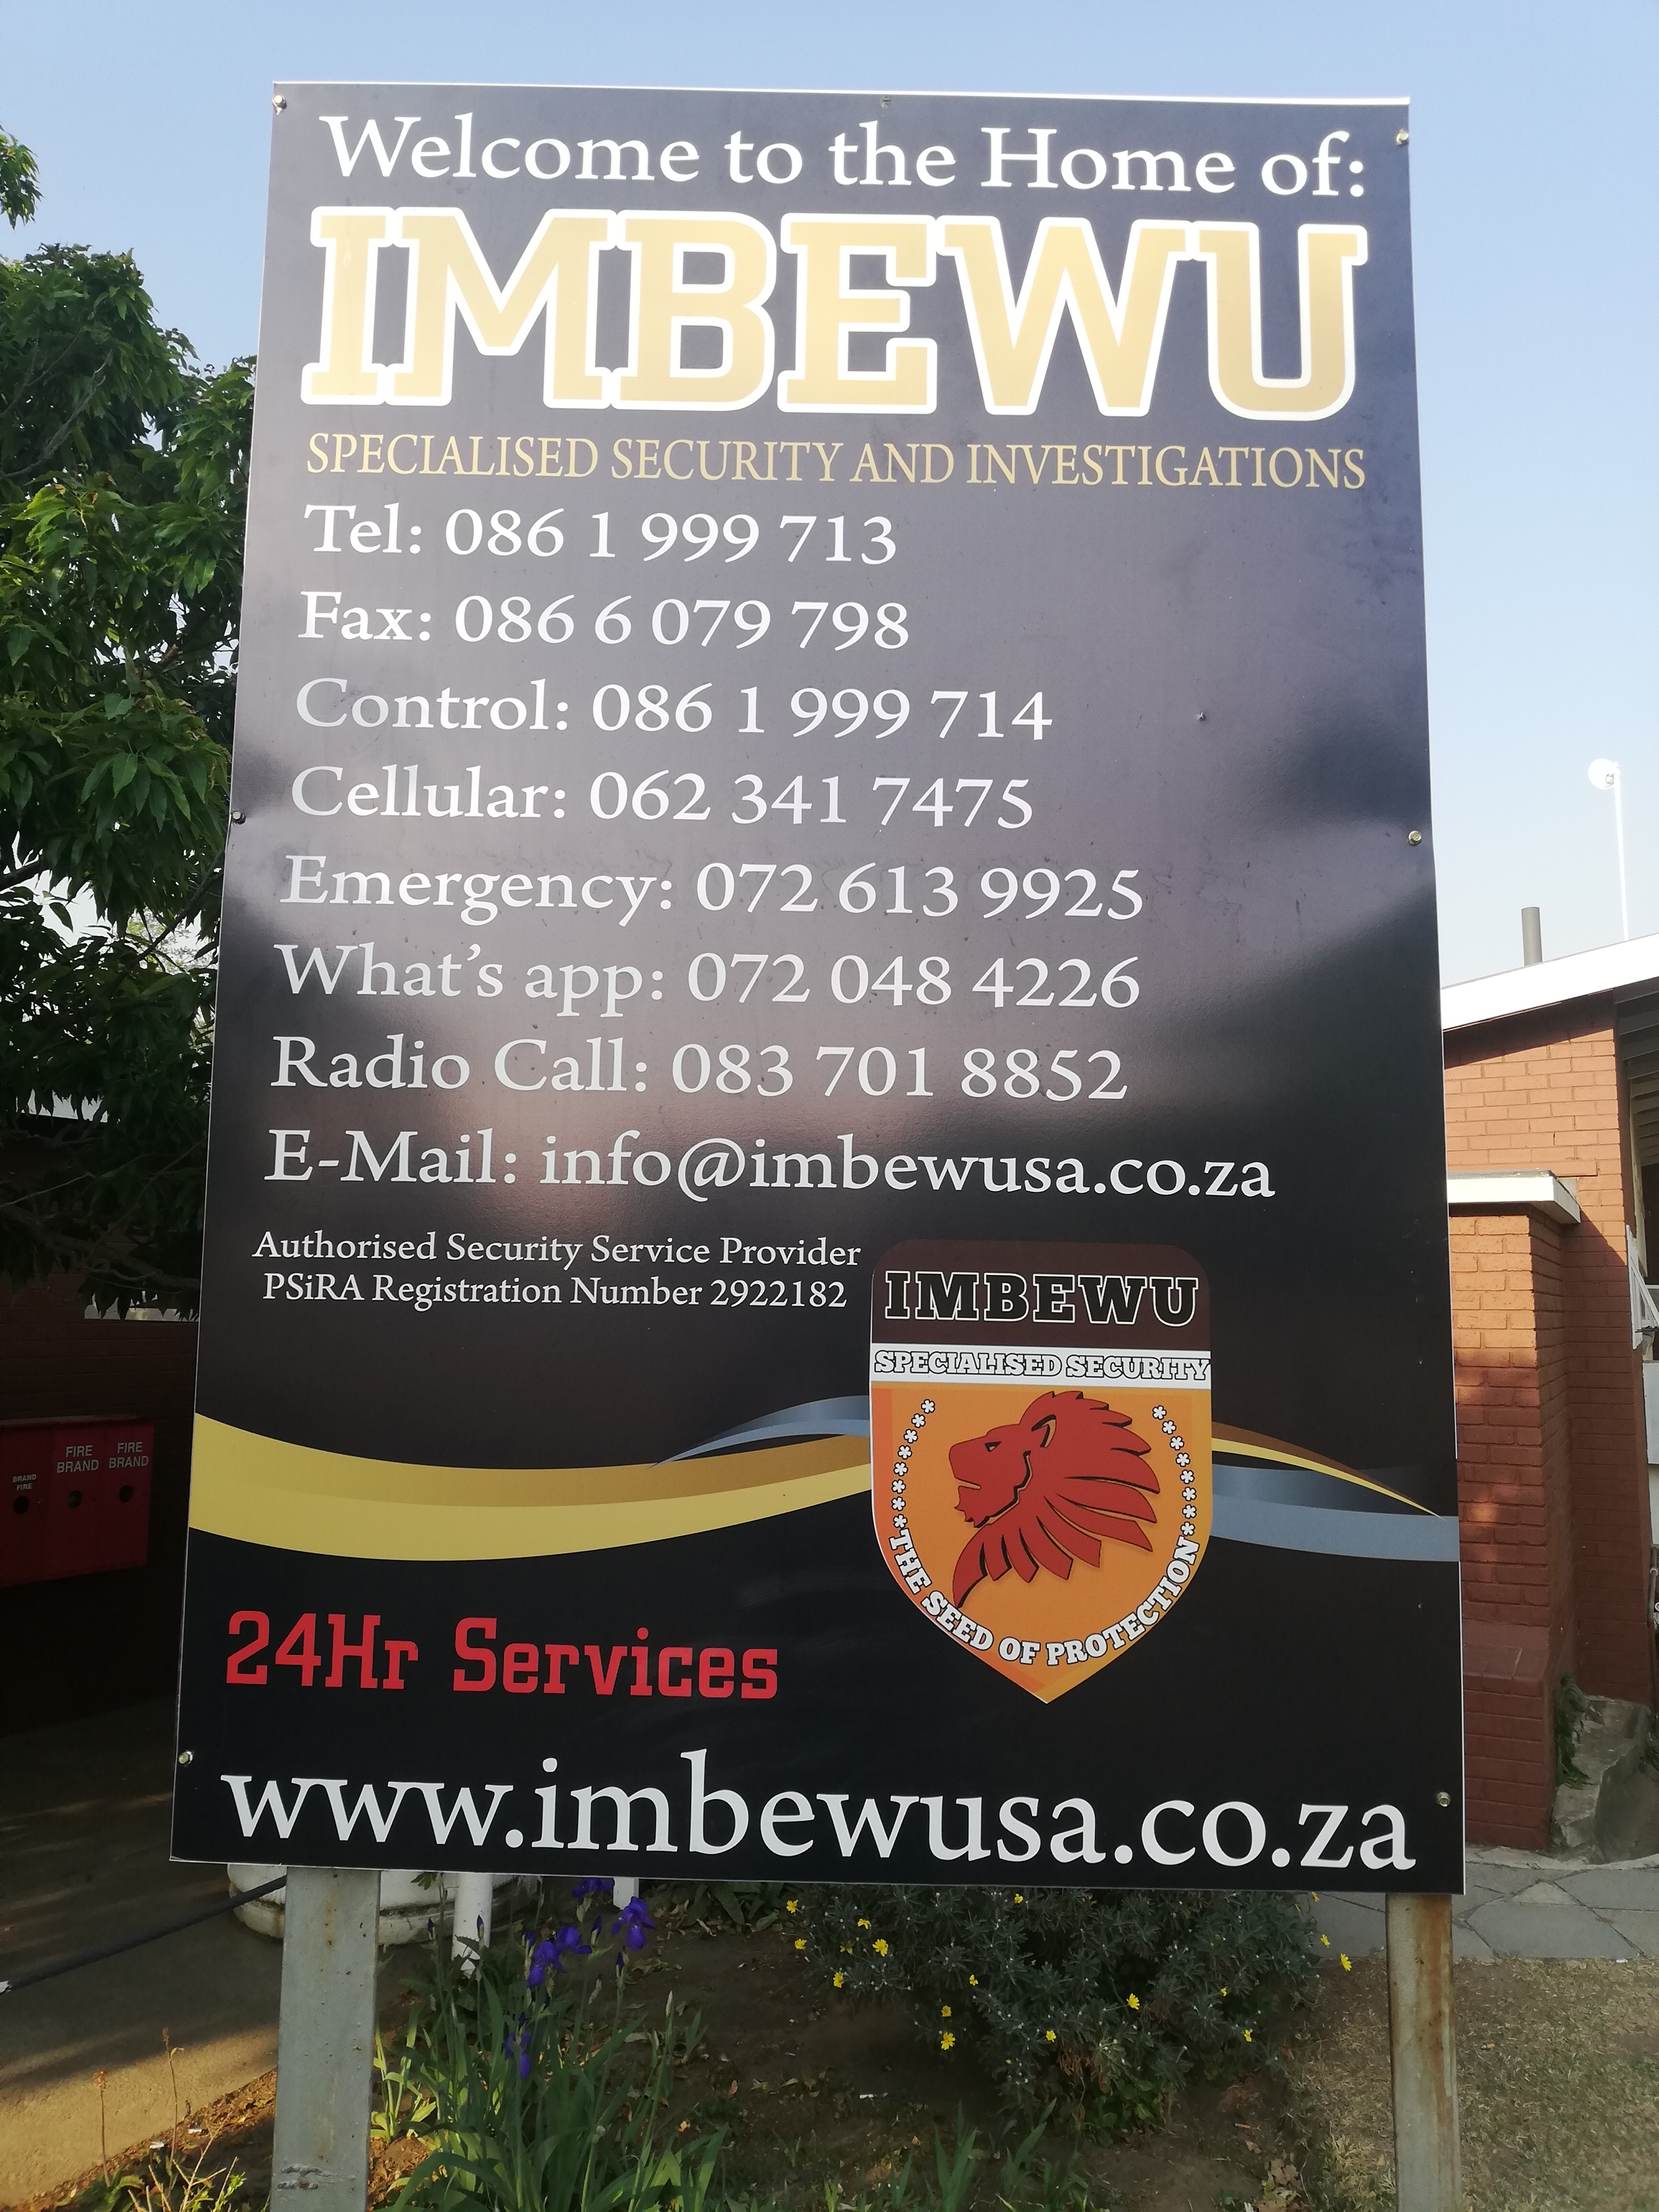 Imbewu Specialised Security services